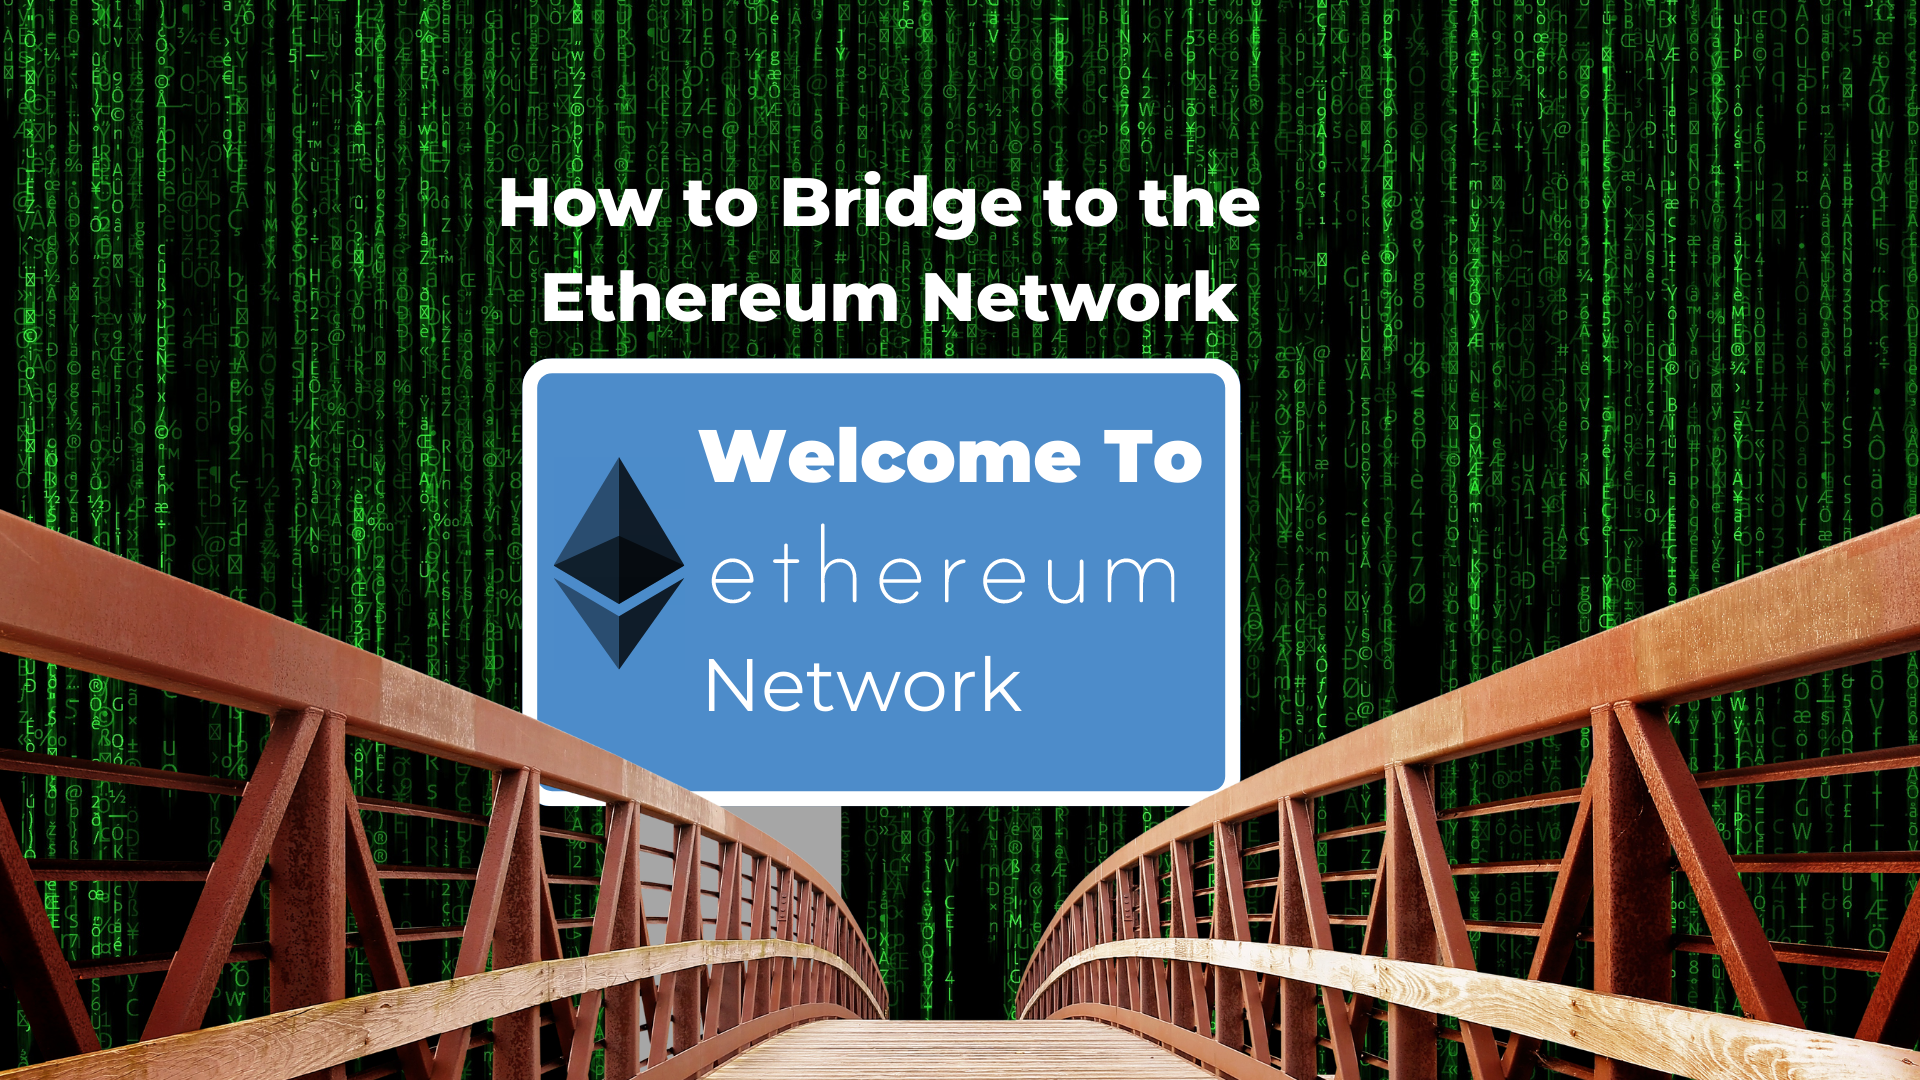 How to Bridge to The Ethereum Network